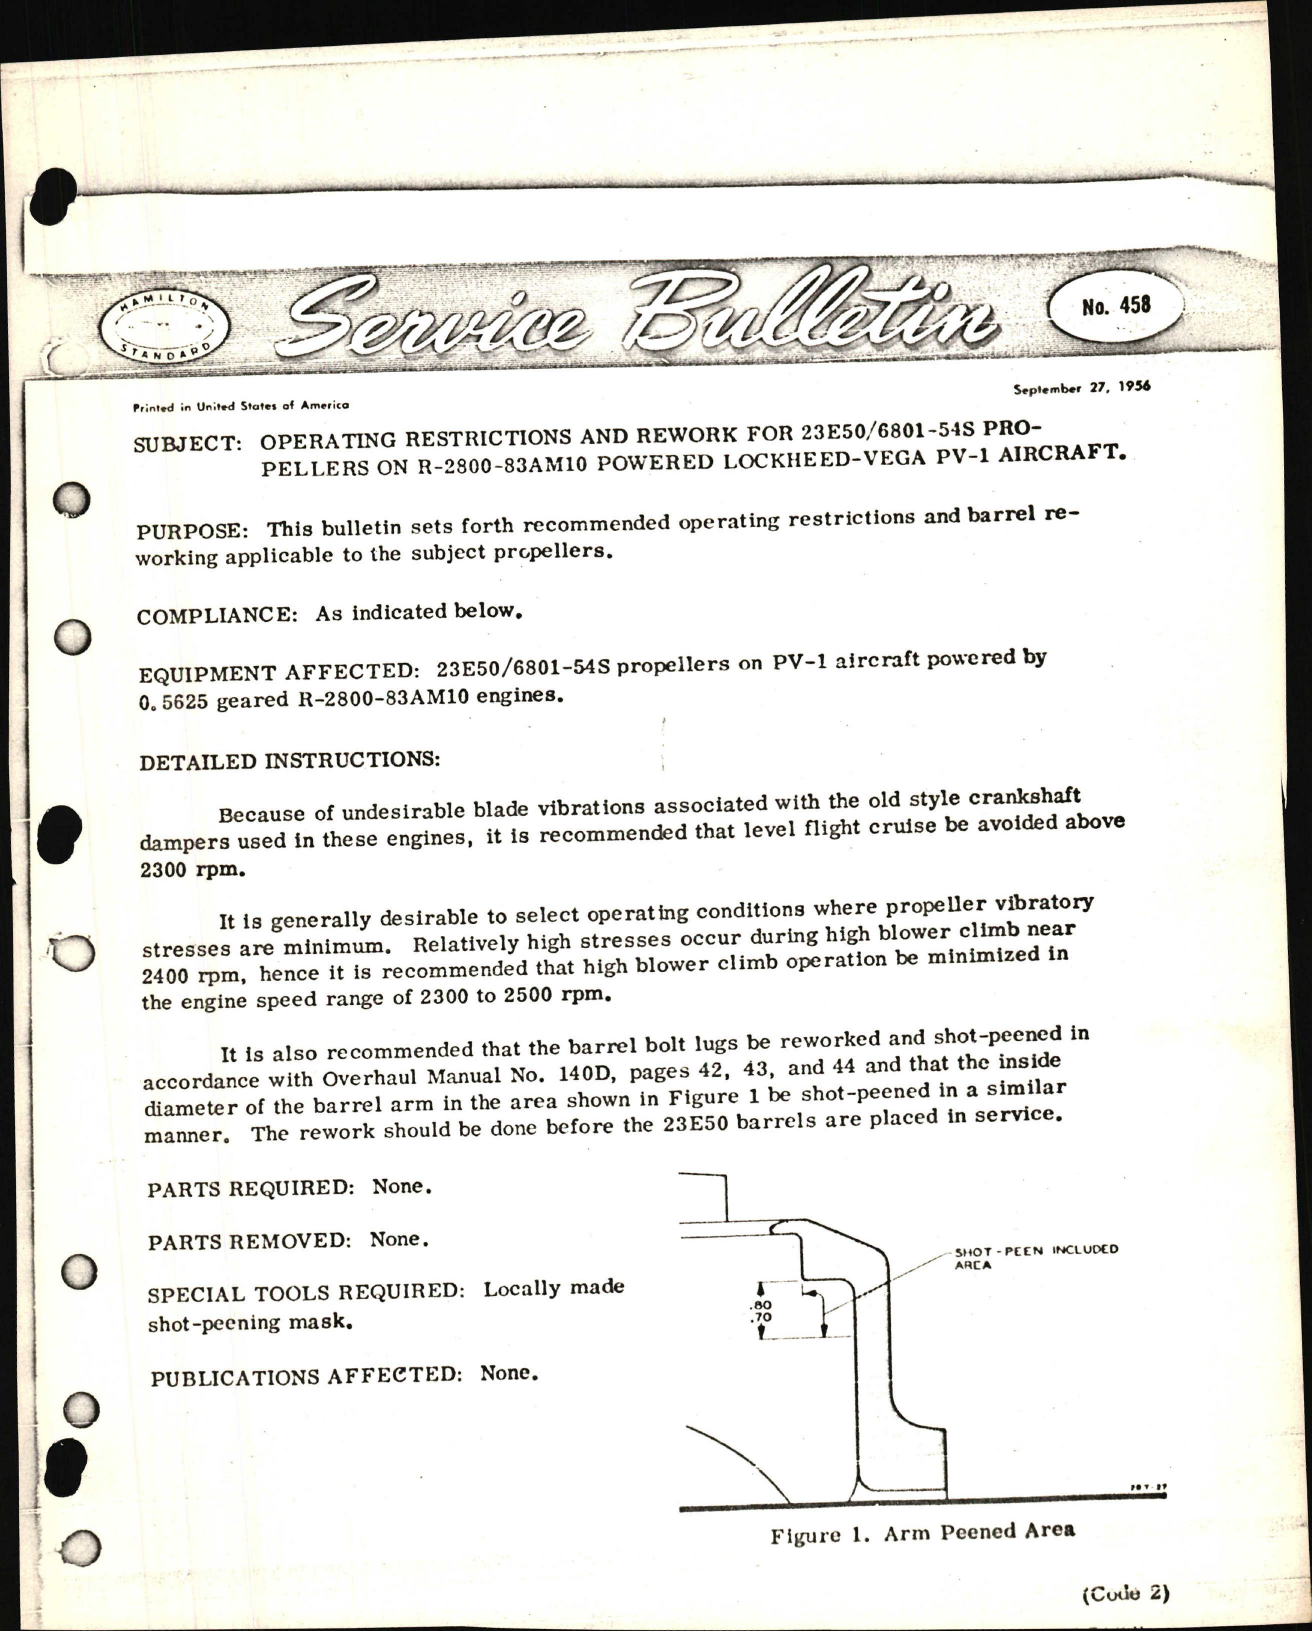 Sample page 1 from AirCorps Library document: Operating Restrictions and Rework for 23E50/6801-54S Propellers on R-2800-83AM10 Powered Lockheed-Vega PV-1 Aircraft